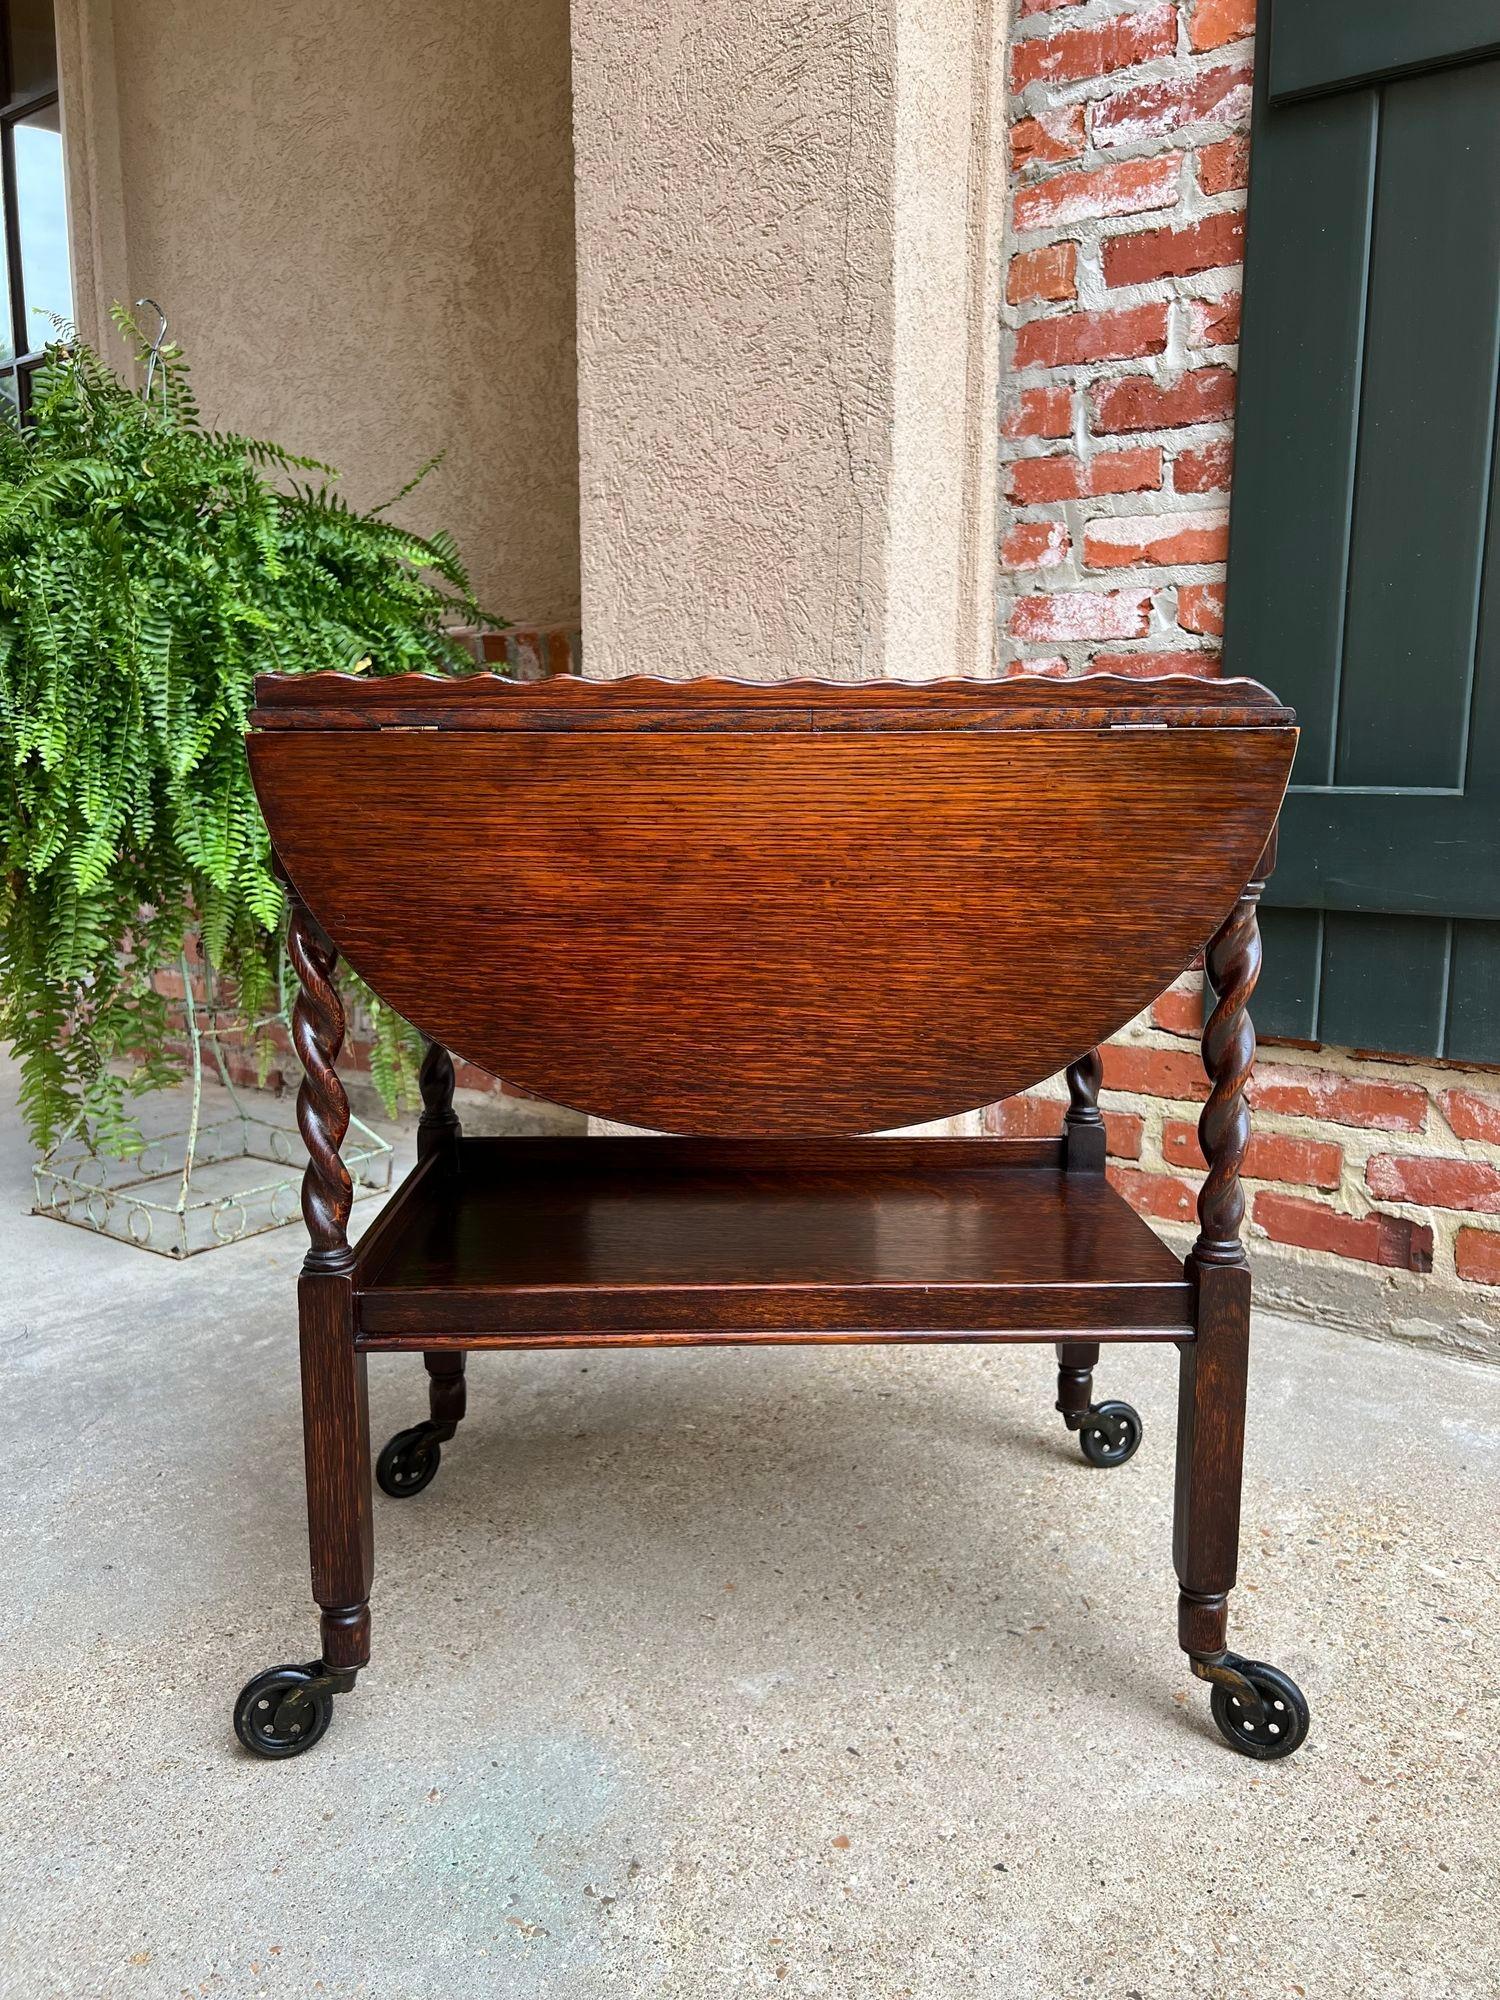 Antique English Tea Trolley Drinks Cart Tiger Oak Barley Twist Drop Leaf Table.

Direct from England, another beautiful antique English oak tea trolley or “dumbwaiter” drinks serving cart. 
Excellent for entertaining, as a drinks or dessert cart,